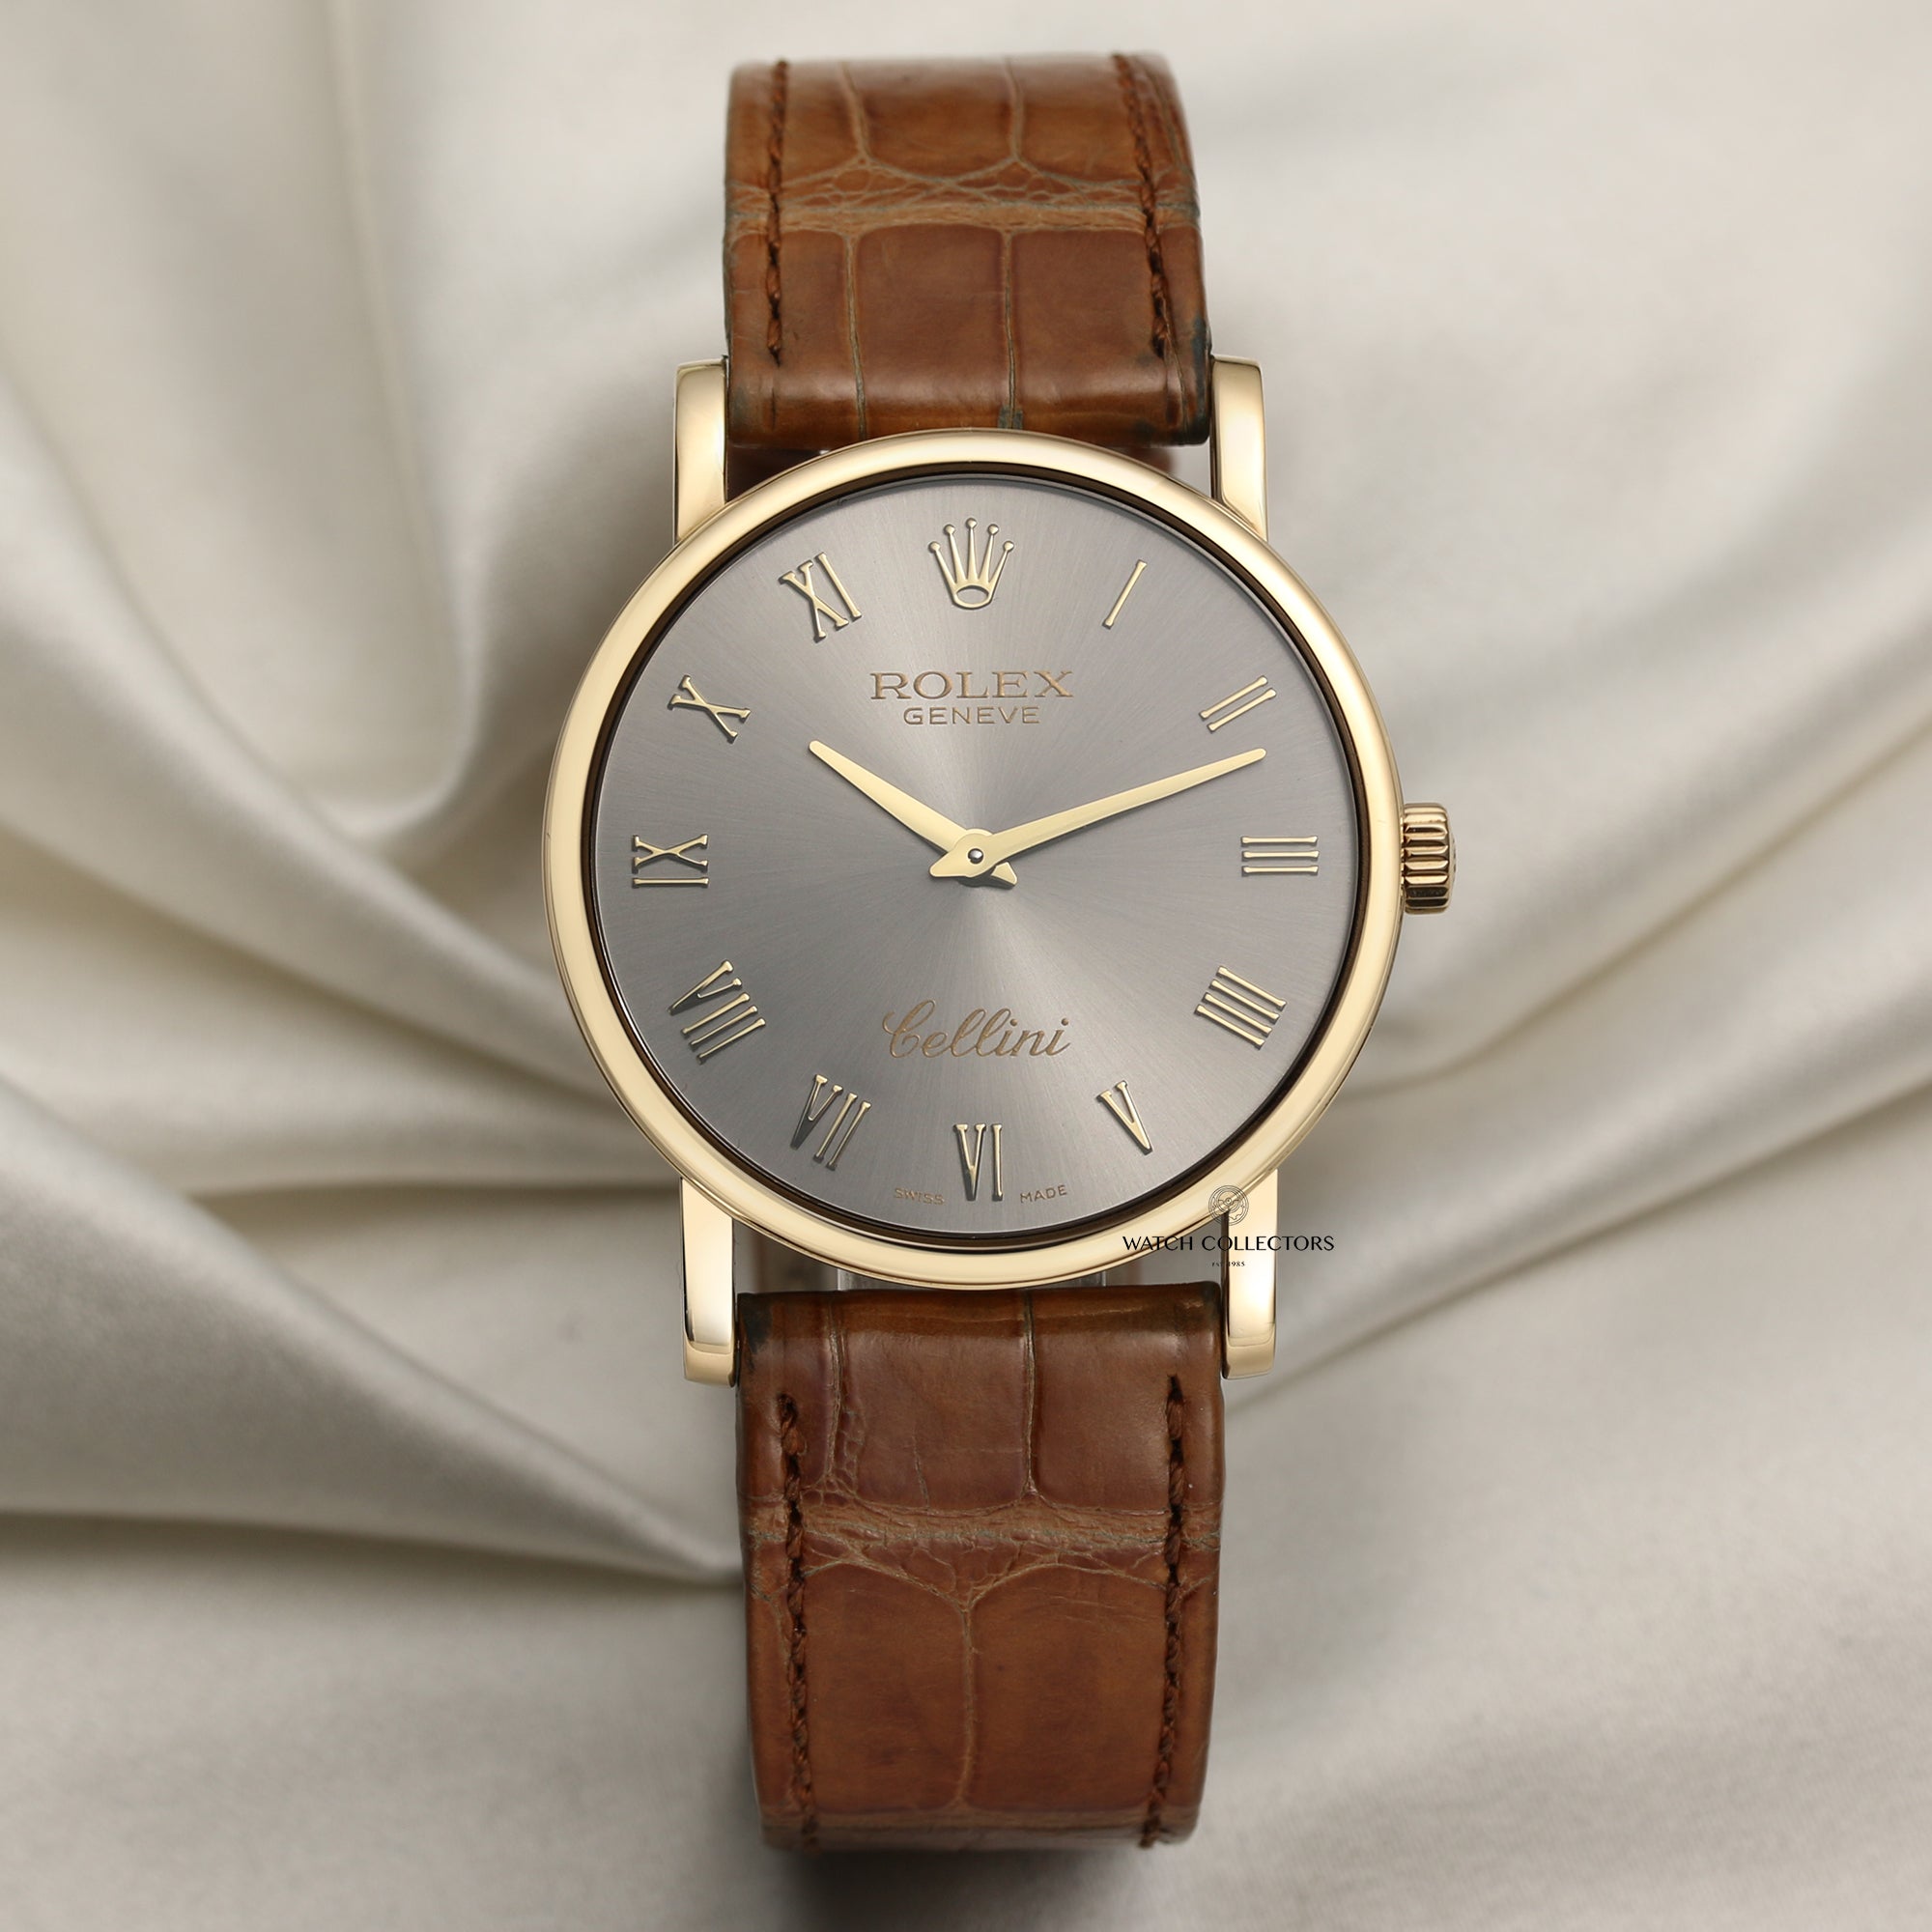 Rolex Cellini 5115-8 18k Yellow Gold – Watch Collectors